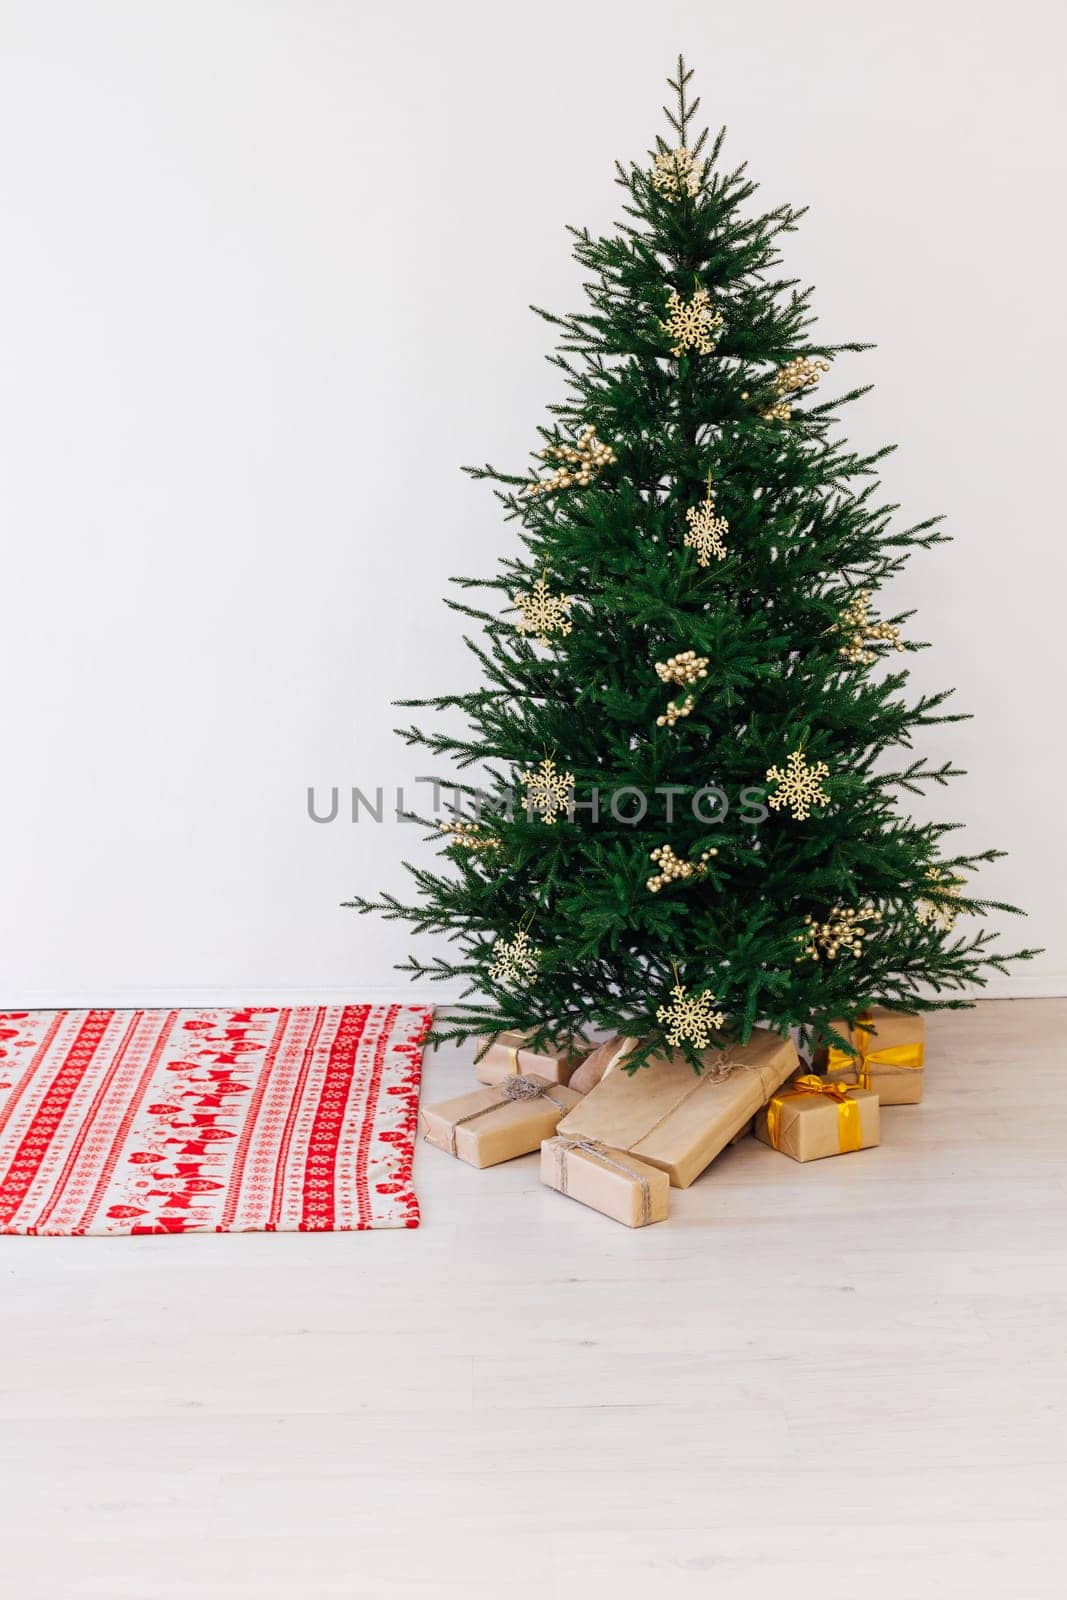 Beautiful decorated room with Christmas tree with presents under it. New year background